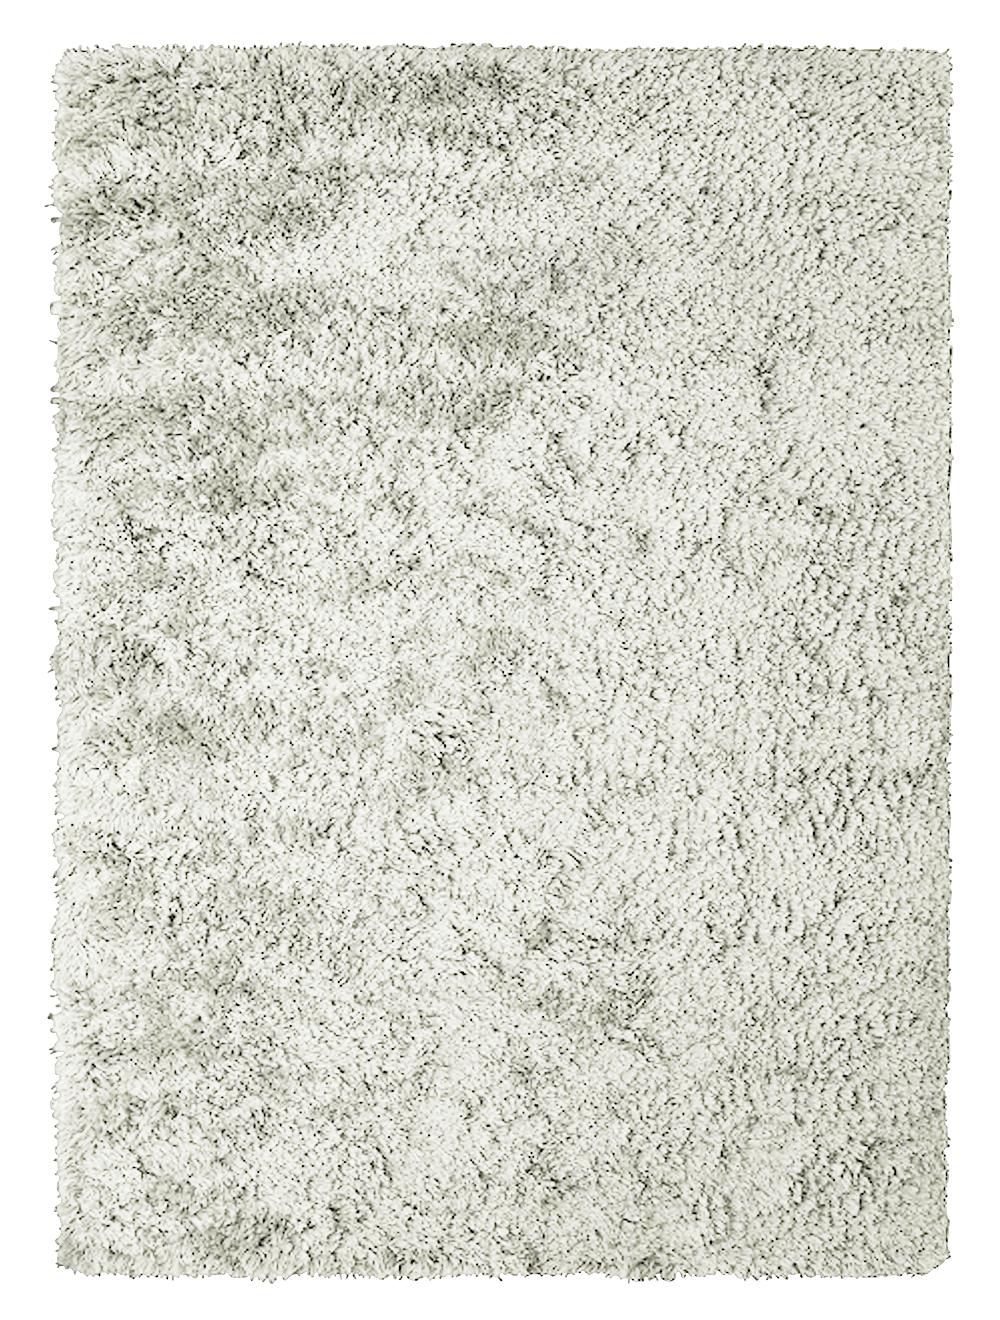 Cream Rya Carpet by Massimo Copenhagen.
Handwoven
Materials: 100% New Zealand wool.
Dimensions: W 200 x H 300 cm.
Available colors: Cream, charcoal, soft grey, and nougat brown.
Other dimensions are available: 140x200 cm, 170x240 cm, and